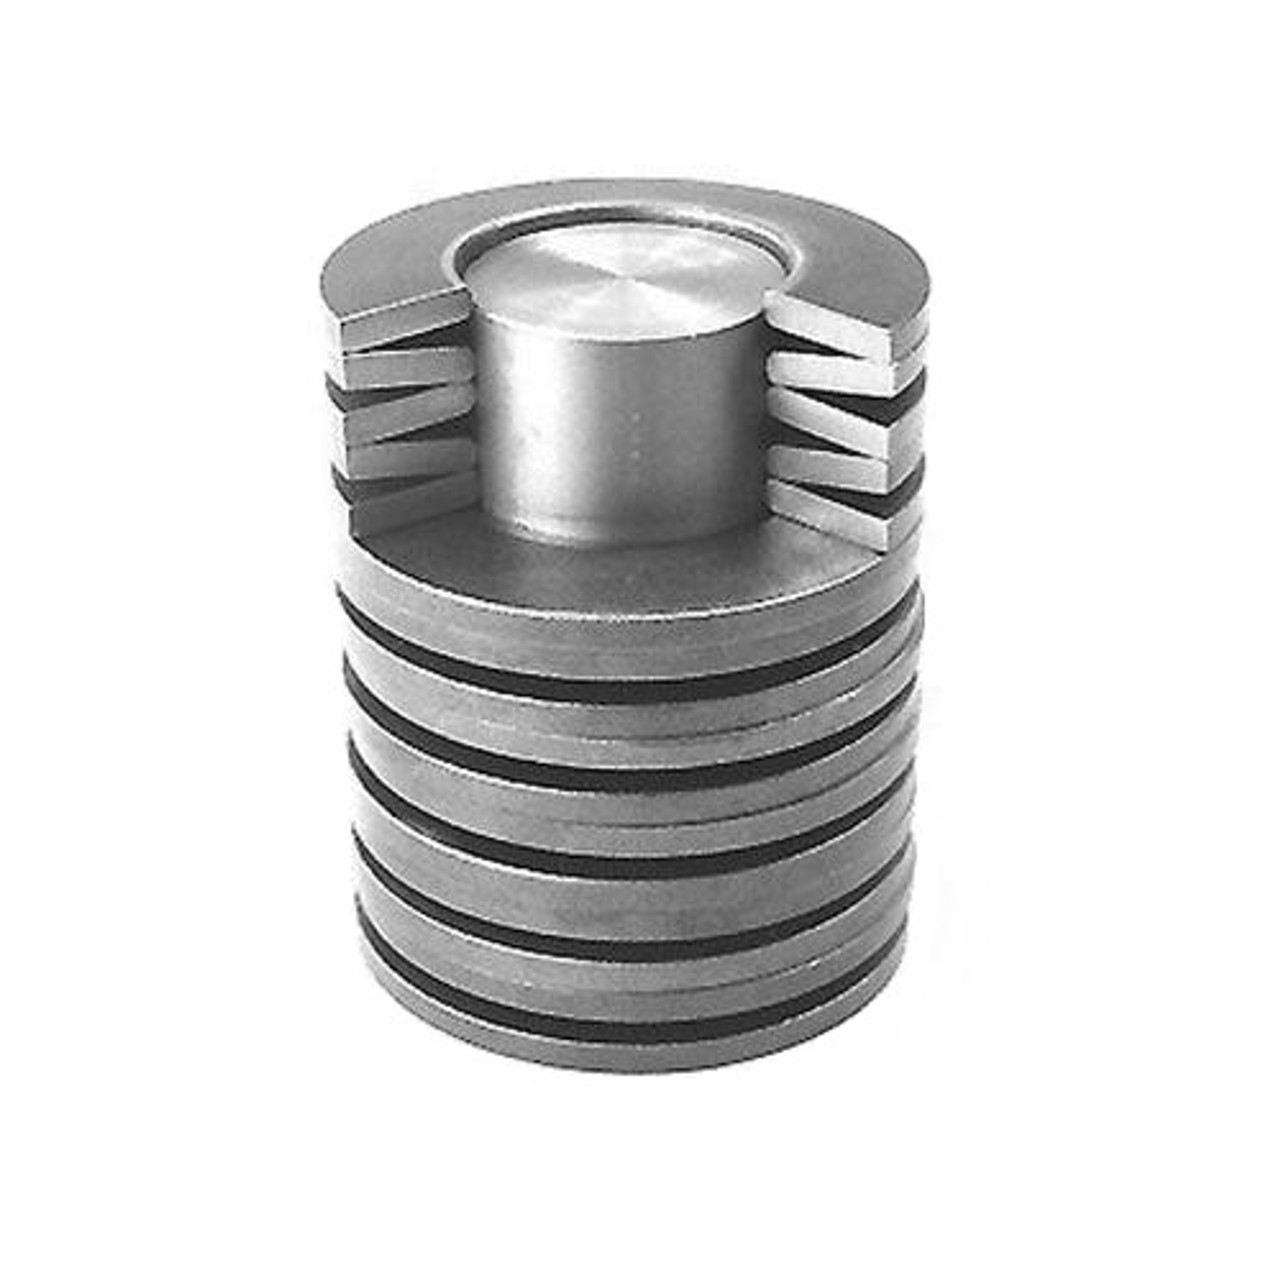 5mm Disc Spring (DIN 2093) Conical Washer  DS005.2-012-05